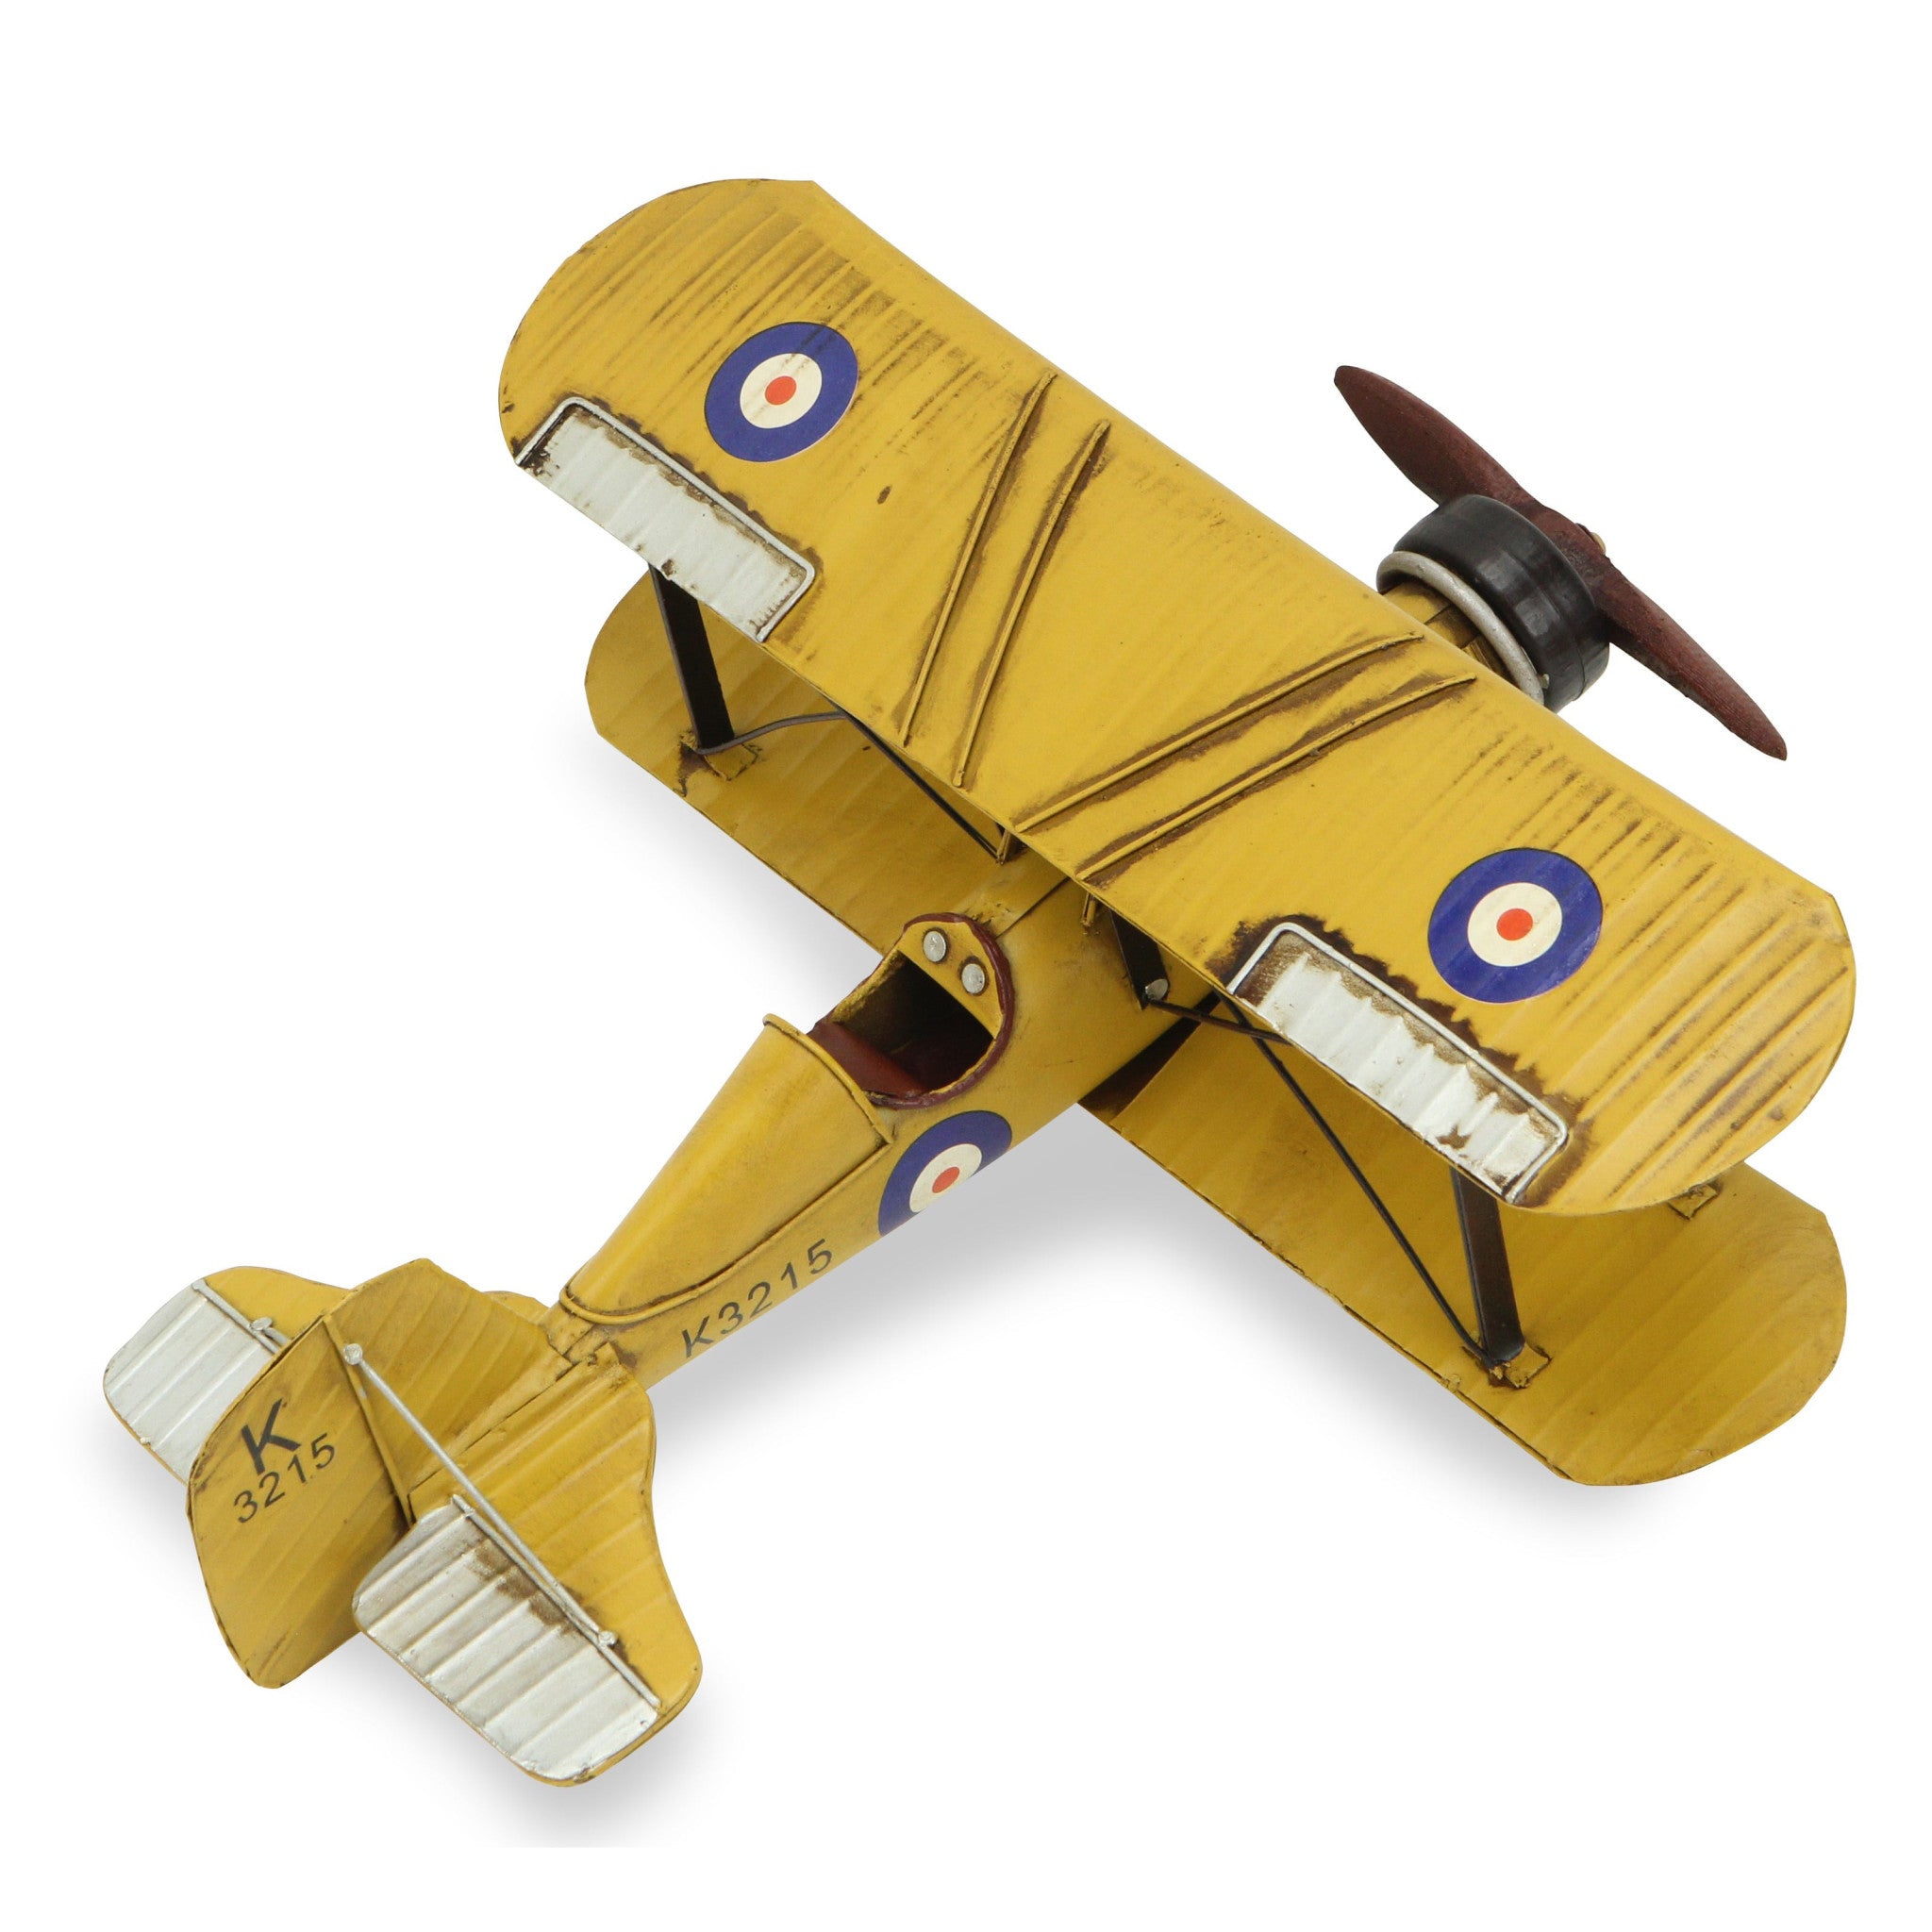 6" Yellow and Black Metal Hand Painted Model Airplane